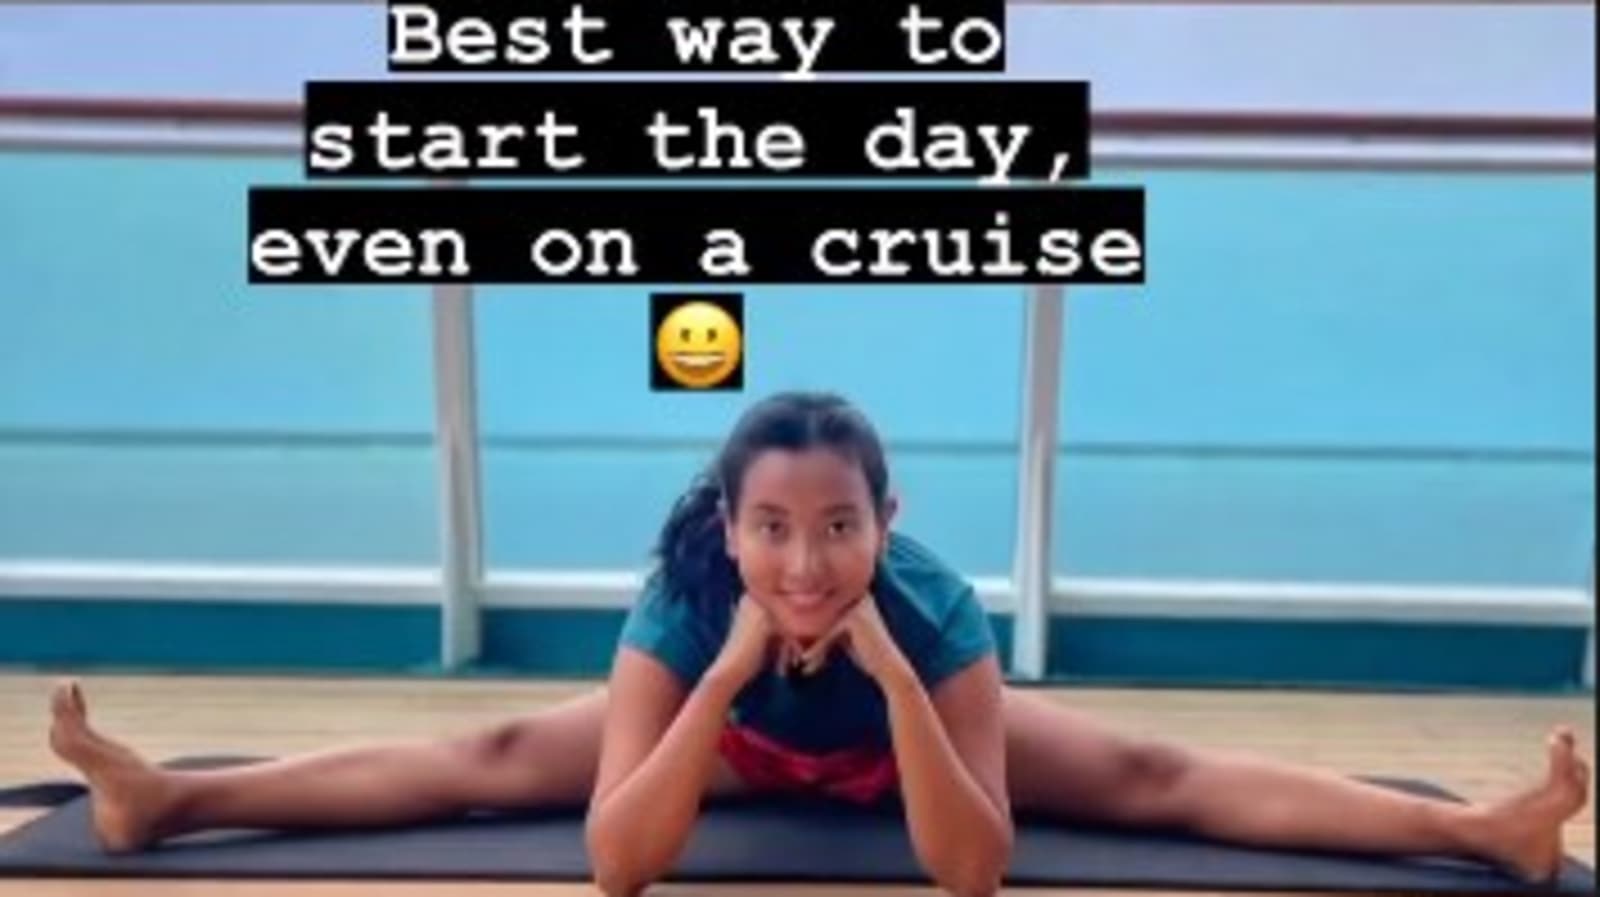 Ankita Konwar’s stretching exercises on cruise are perfect Sunday fitness inspo